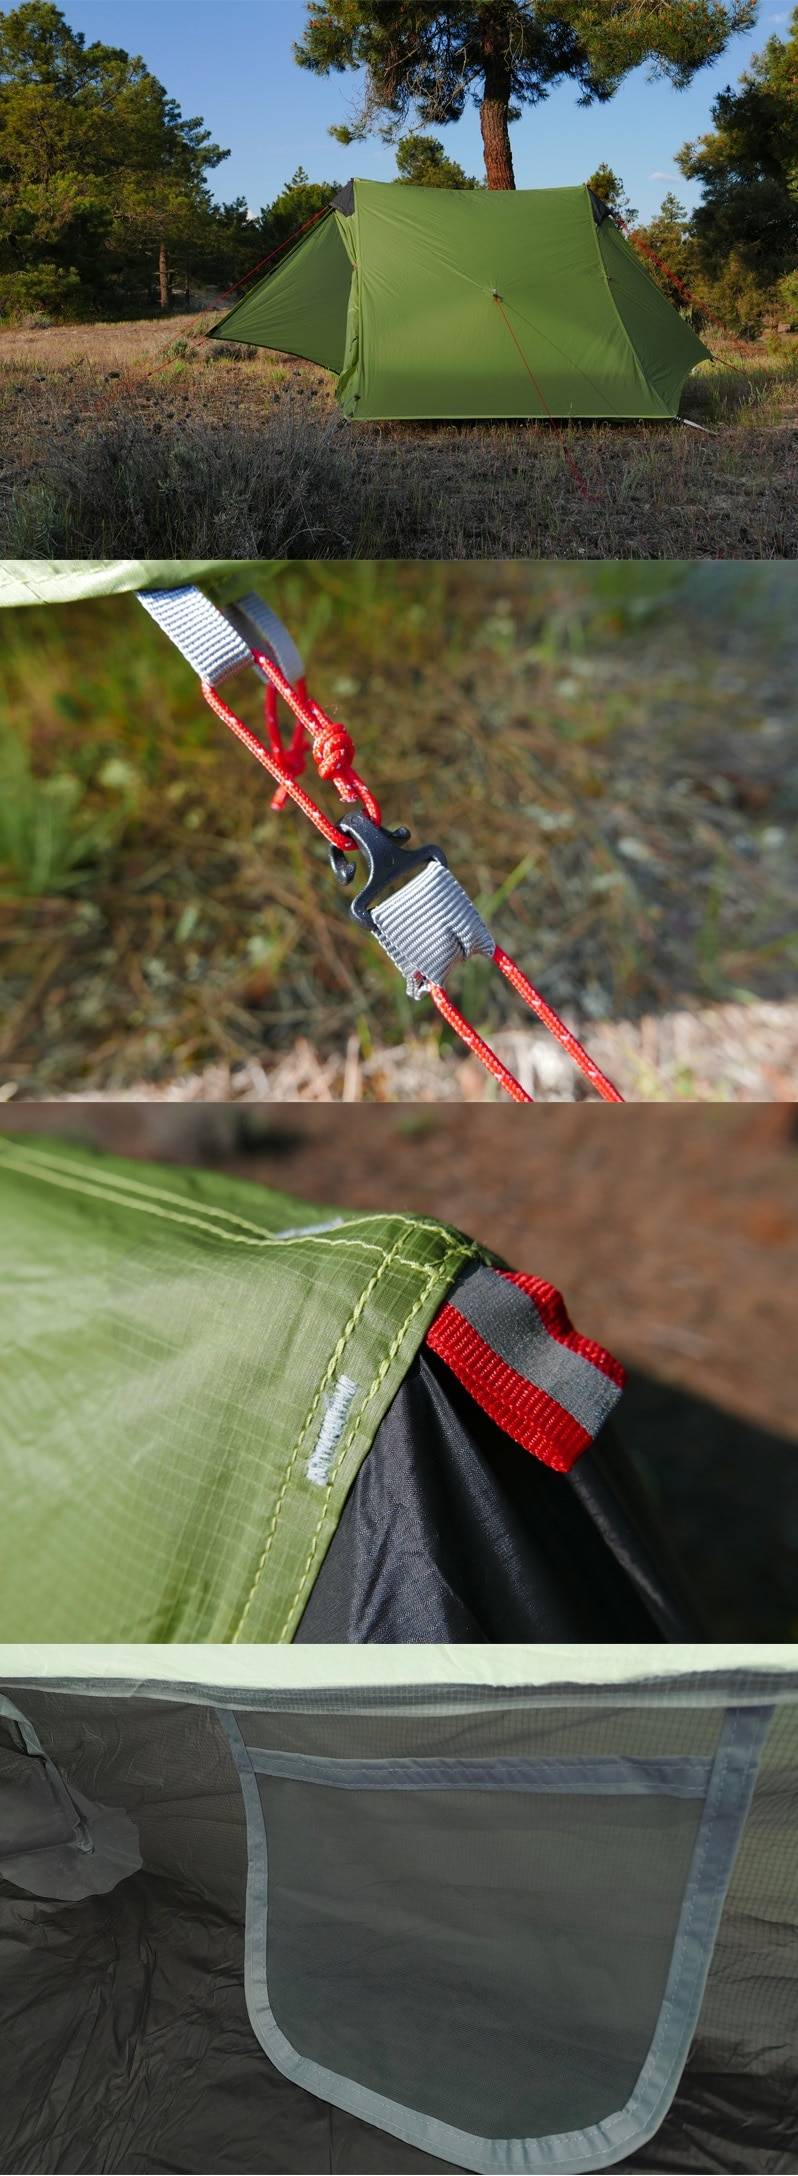 Ultralight Double Layer Tent